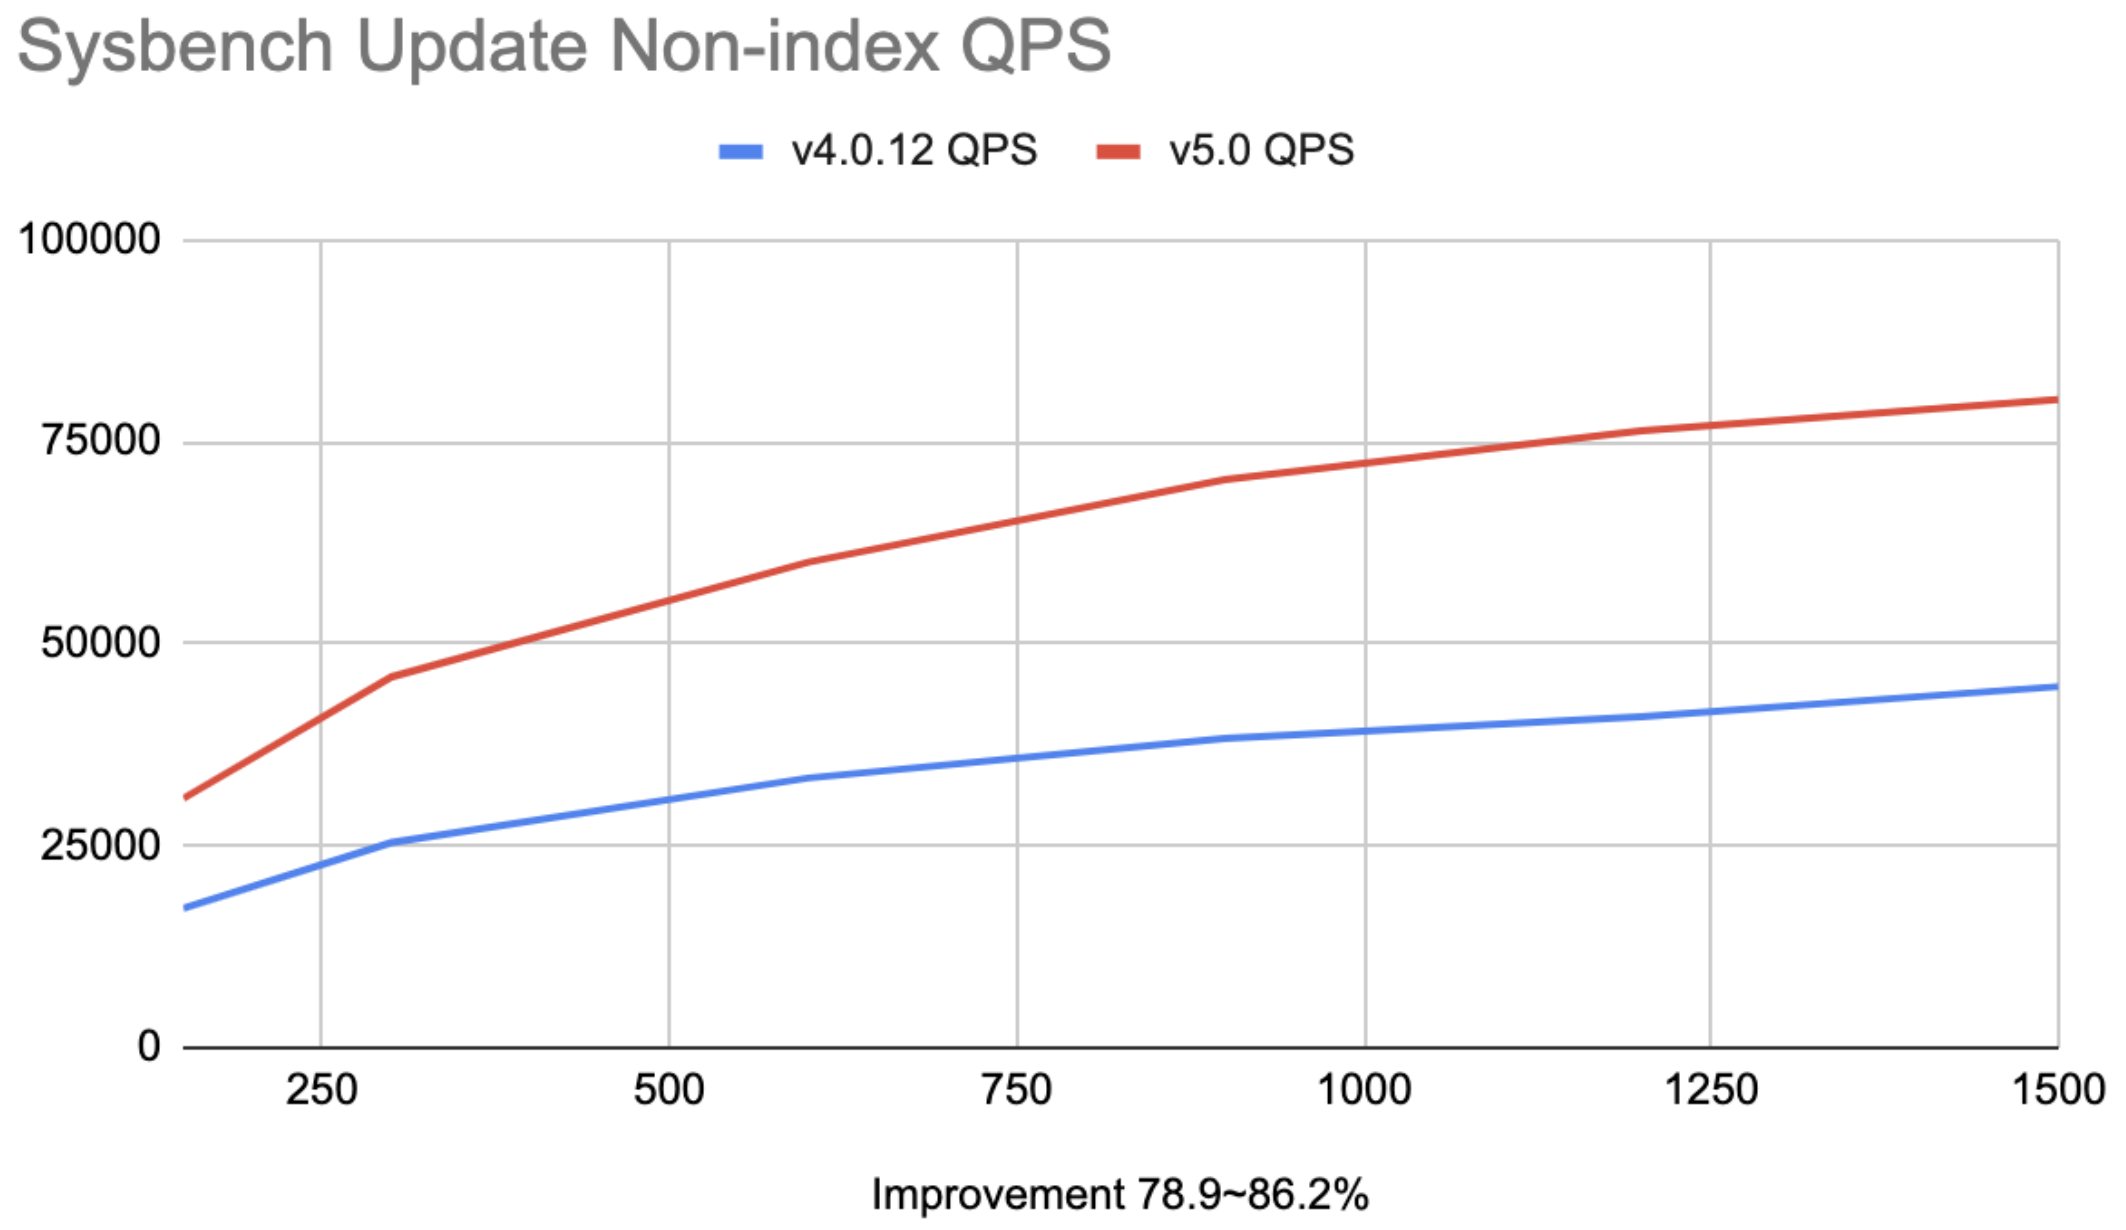 TiDB 4.0 vs. TiDB 5.0 for sysbench update non-index